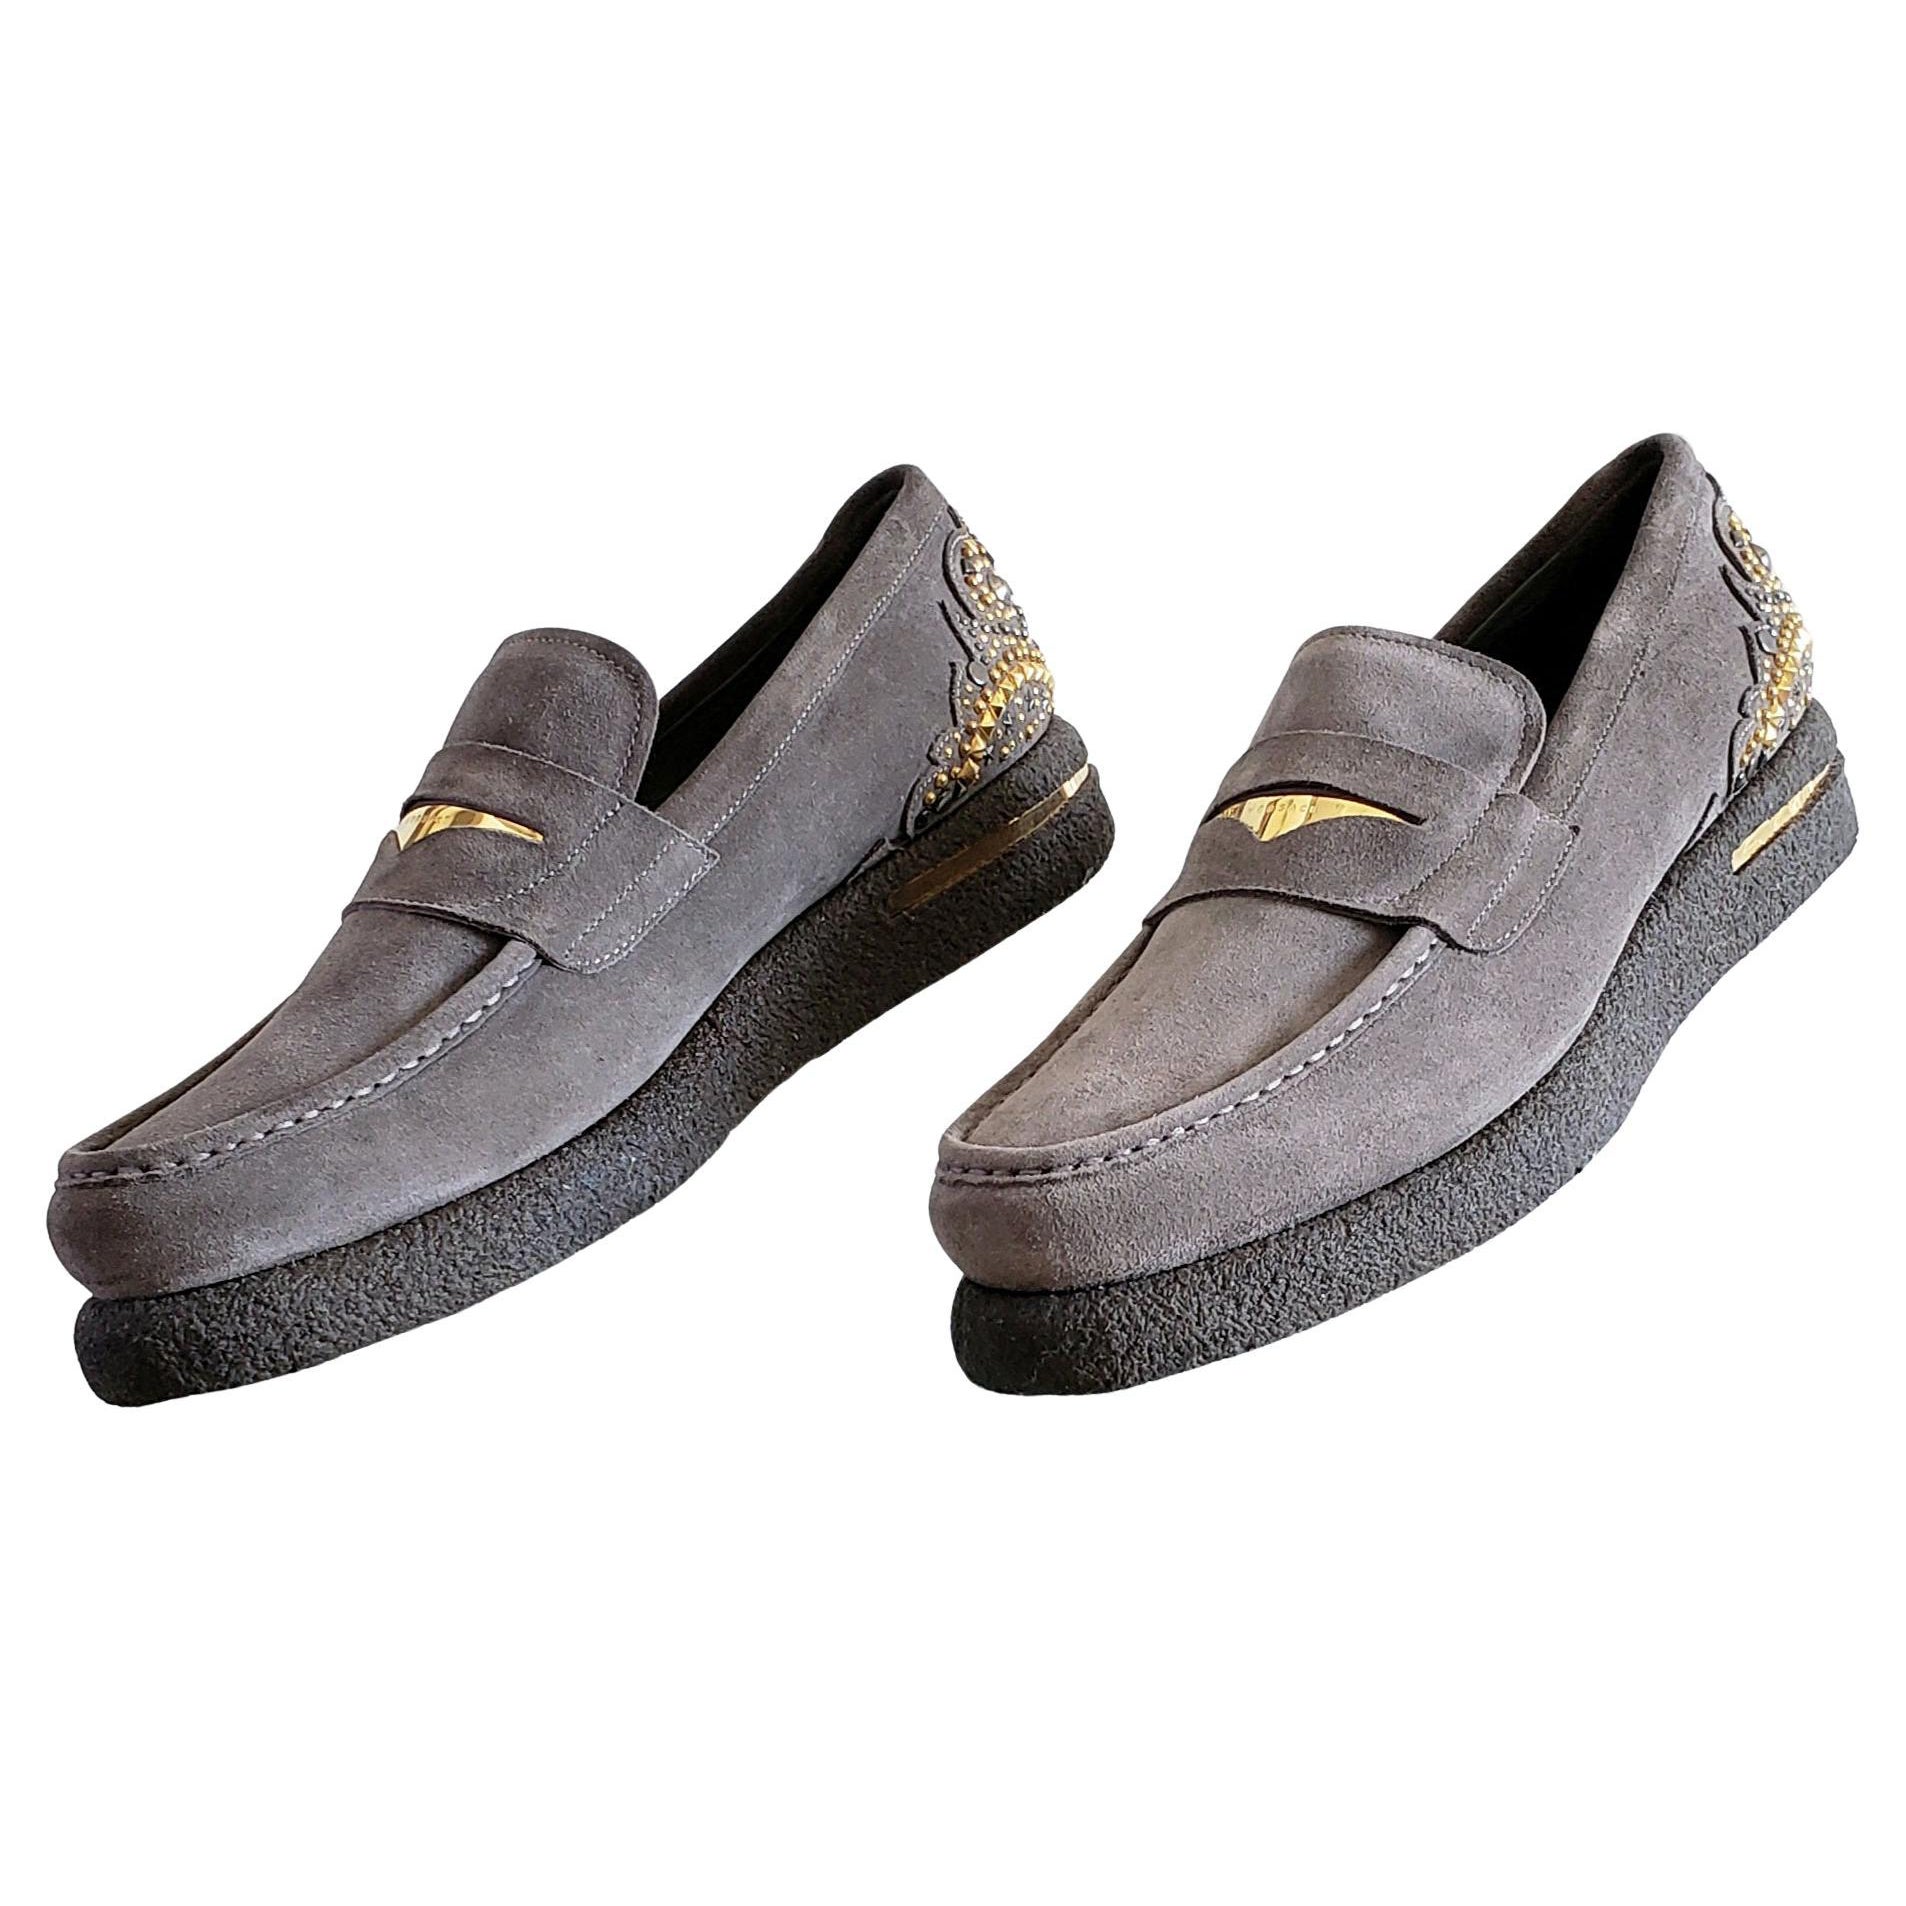 F/W2013 Look #22 NEW VERSACE GRAY SUEDE LEATHER LOAFERS SHOES with STUDS 44 - 11 For Sale